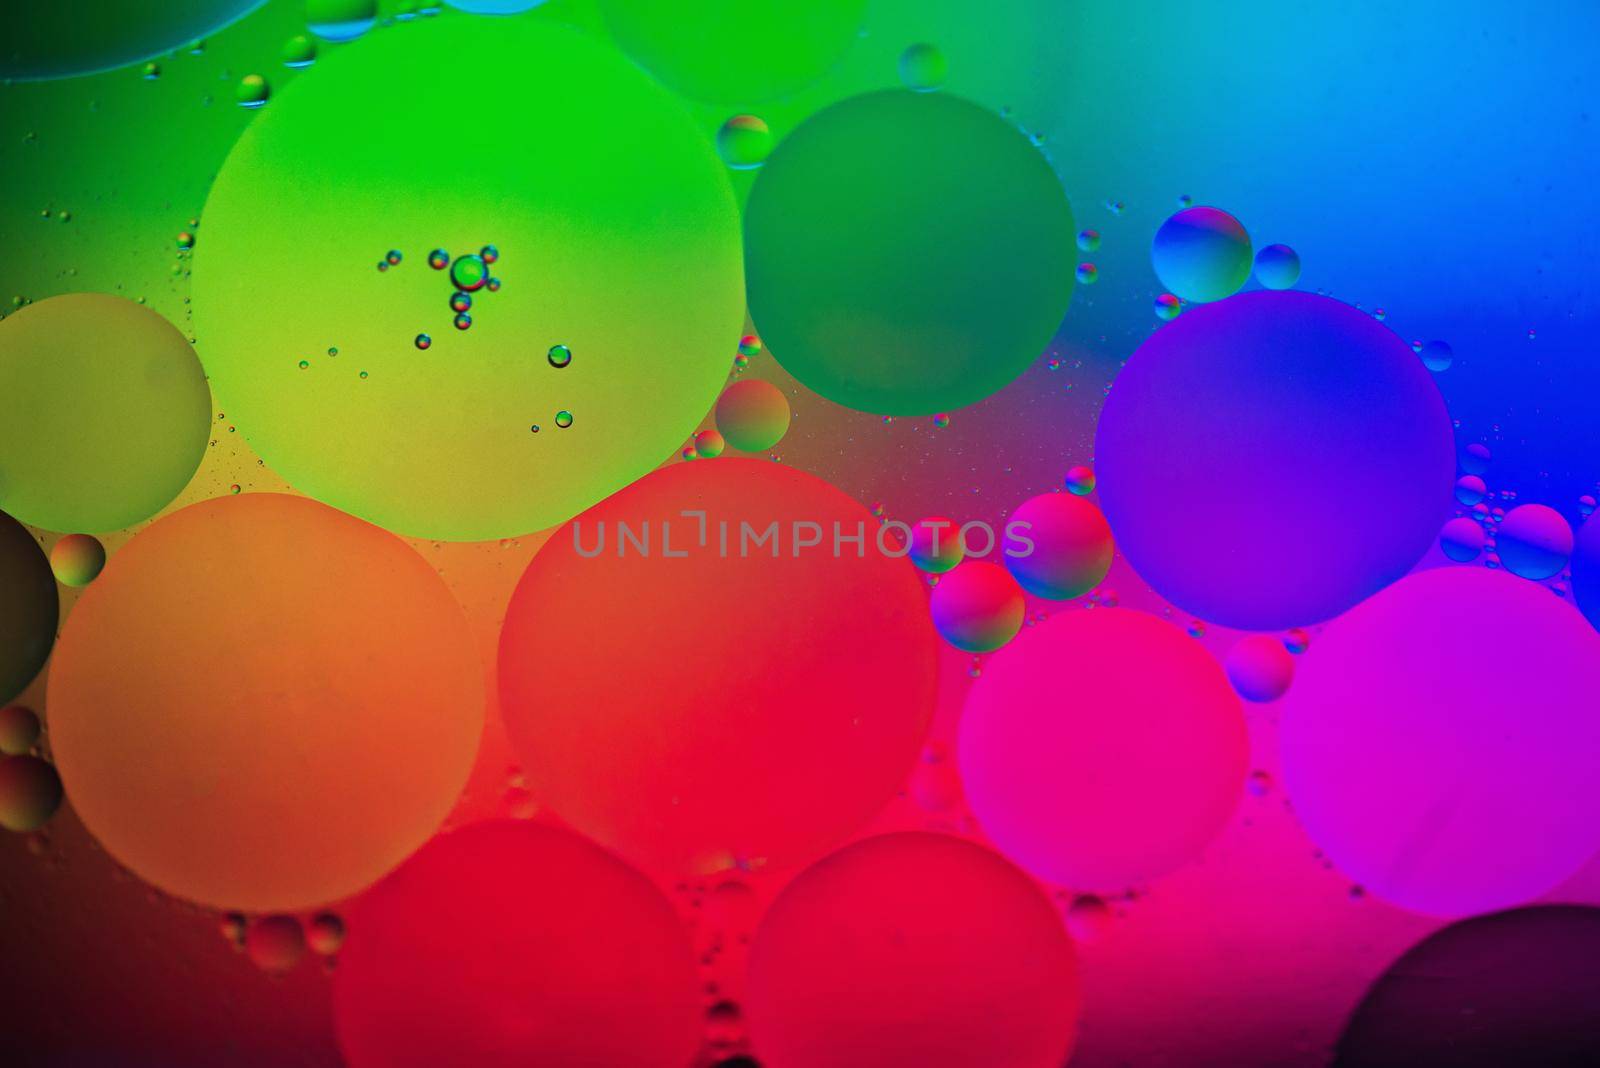 Oil drops in water. Abstract psychedelic pattern image rainbow colored. Abstract background with colorful gradient colors. DOF